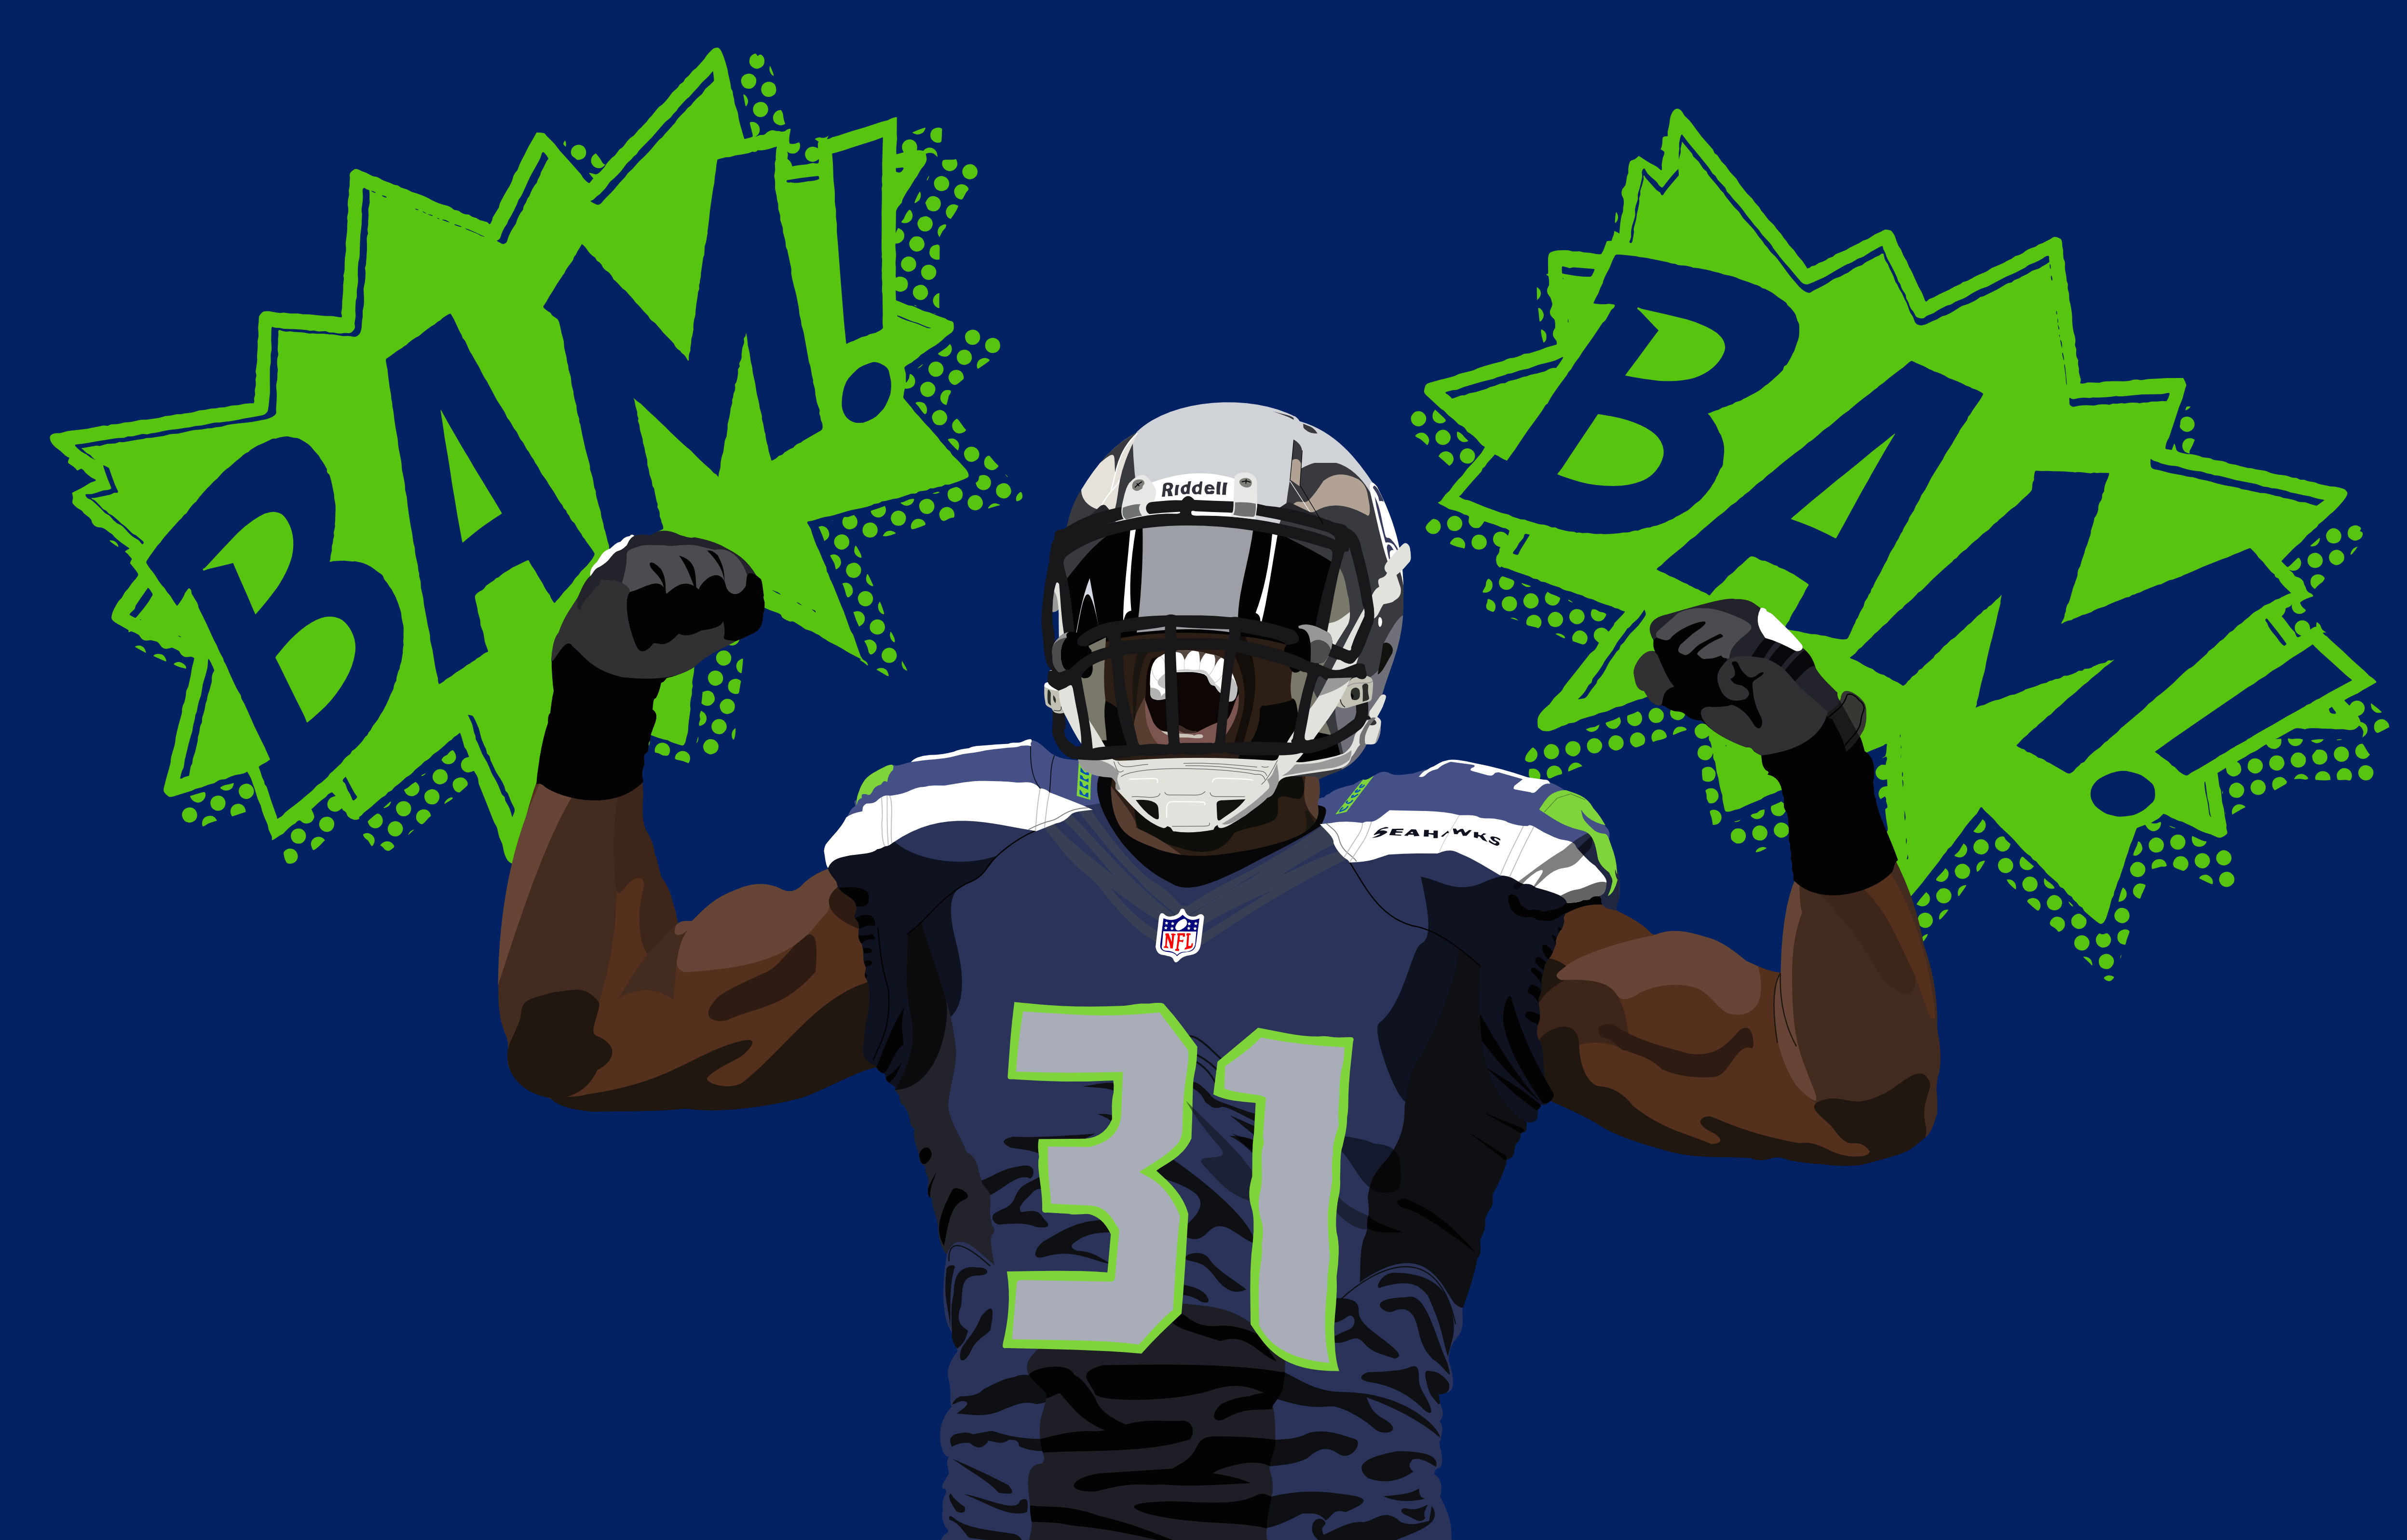 Vectorized Kam Chancellor, hope you guys like it!